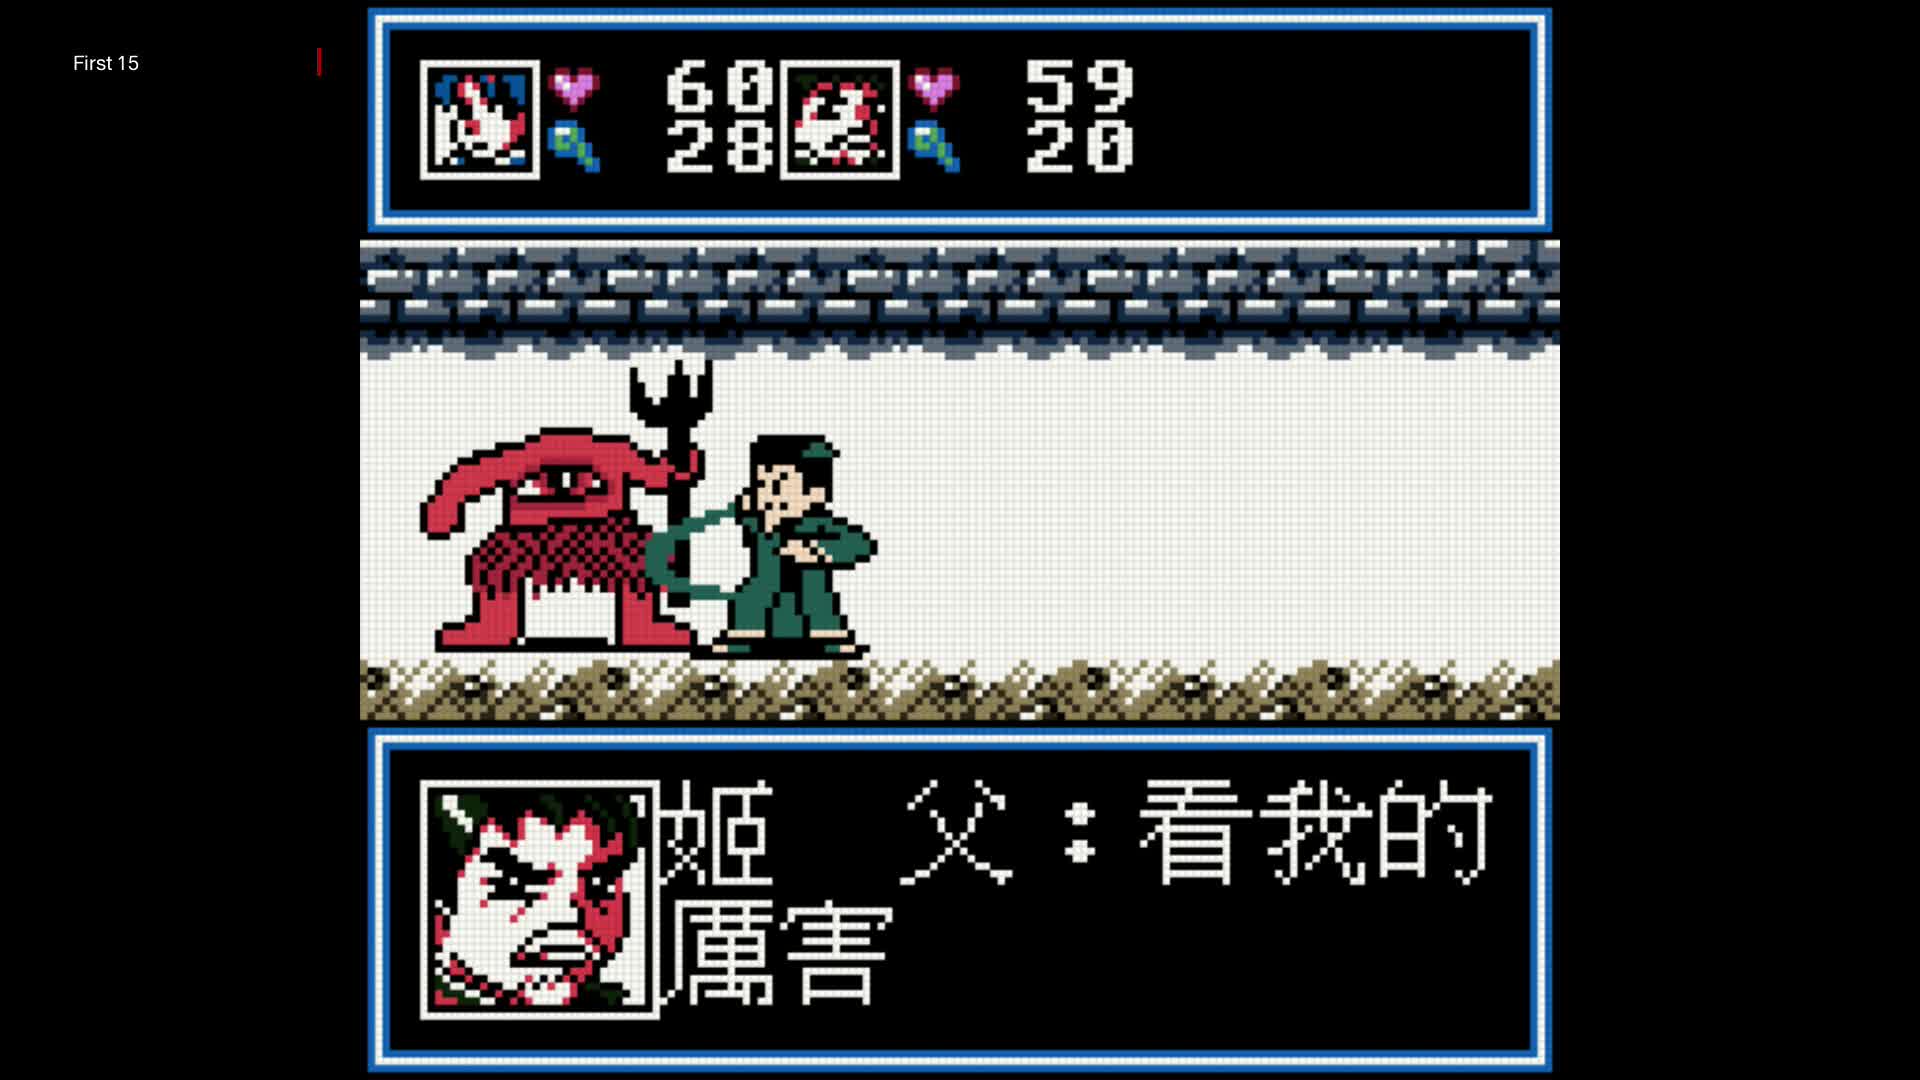 The First 15 Minutes of 新封神榜 (Xin Feng Shen Bang, Game Boy Color)